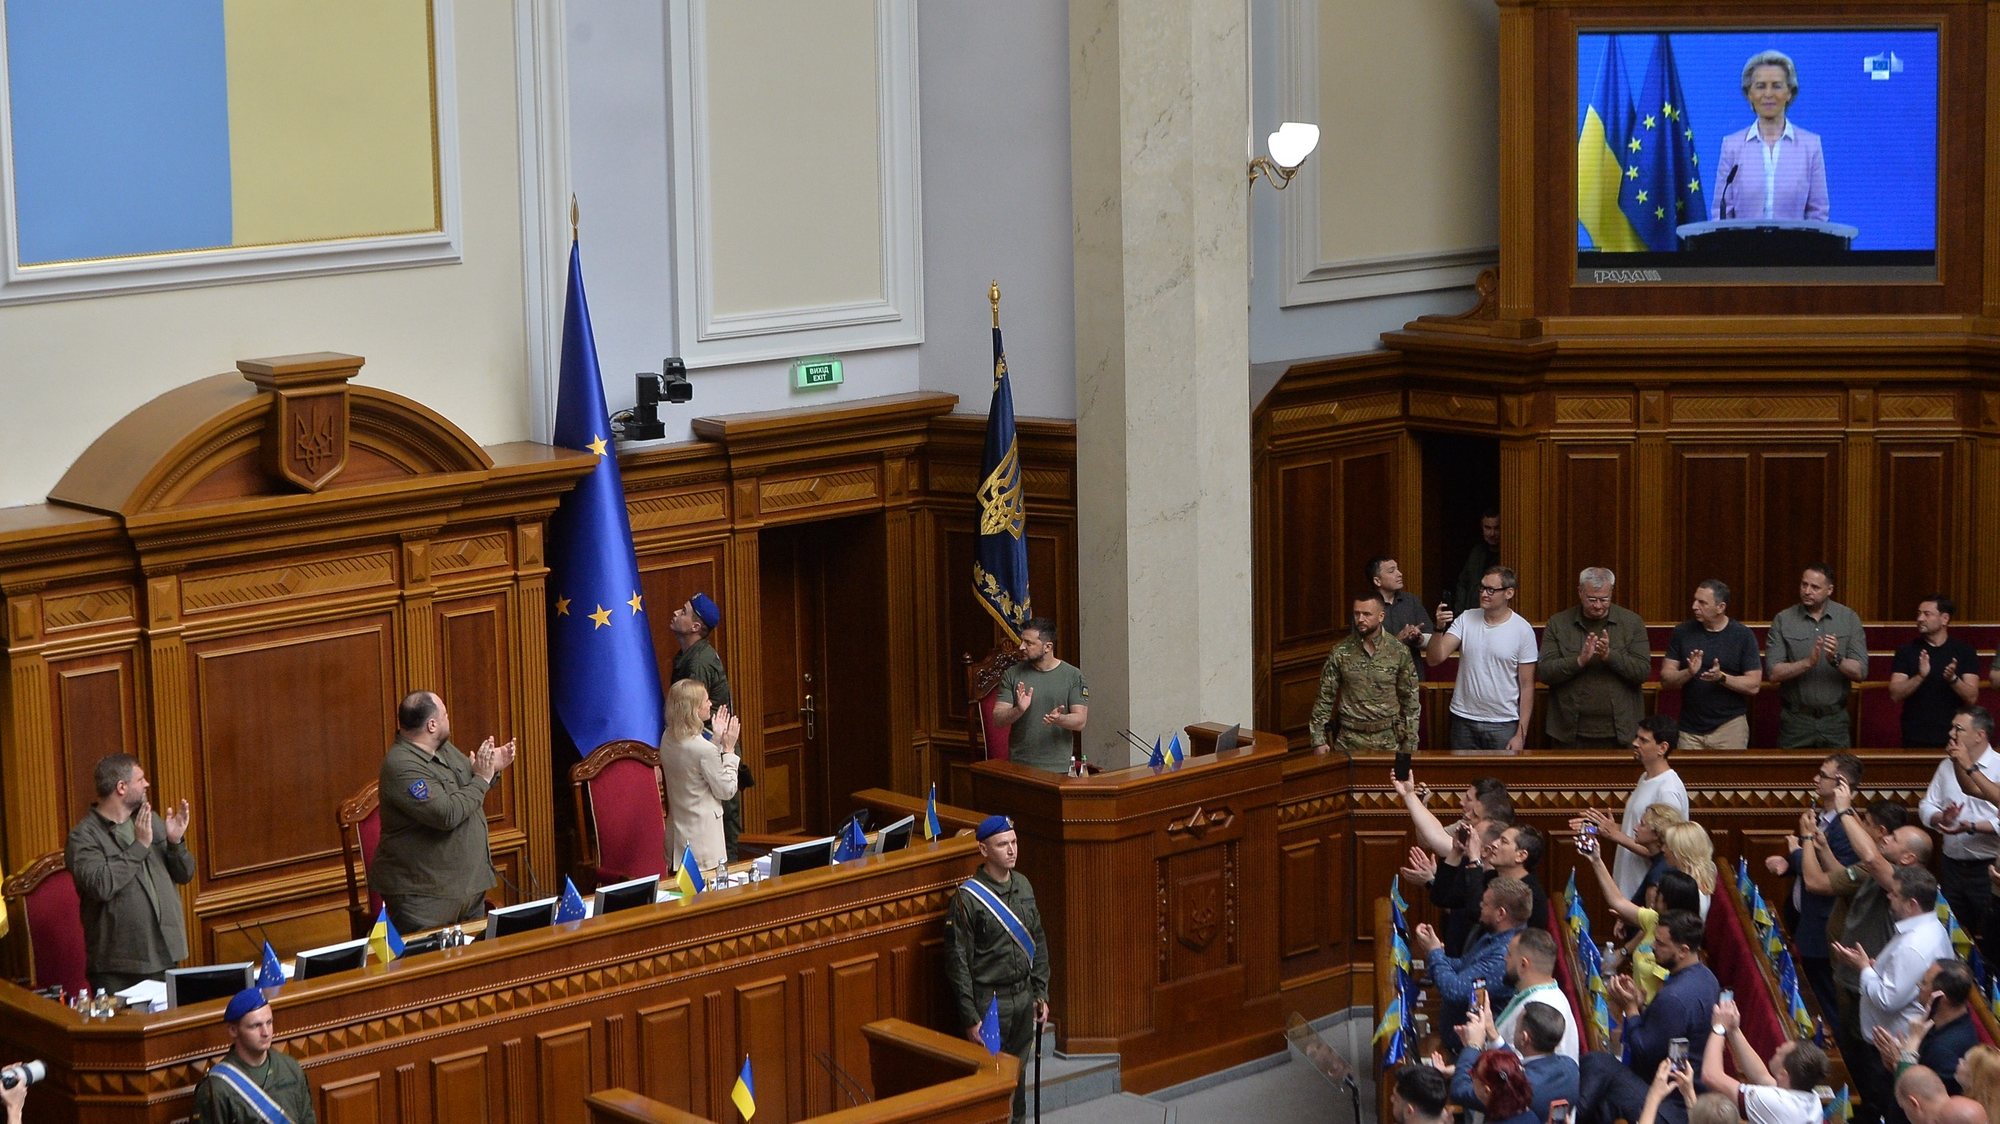 epa10045588 A Ukrainian serviceman raises the EU flag as European Commission President Ursula von der Leyen (on screen) remotely addresses Ukrainian deputies and Ukrainian President Volodymyr Zelensky (C) in the Verkhovna Rada (Ukrainian Parliament) in Kyiv, Ukraine, 01 July 2022. Ursula von der Leyen stated conditions as part of reforms that will bring the country into the European Union. The heads of state and government of the European Union at a summit in Brussels on June 23 approved granting Ukraine and Moldova the status of candidates for joining the union. To start accession negotiations, countries need to fulfil a number of conditions, including anti-corruption and judicial reforms, and strengthening the fight against oligarchs.  EPA/ANDRII NESTERENKO